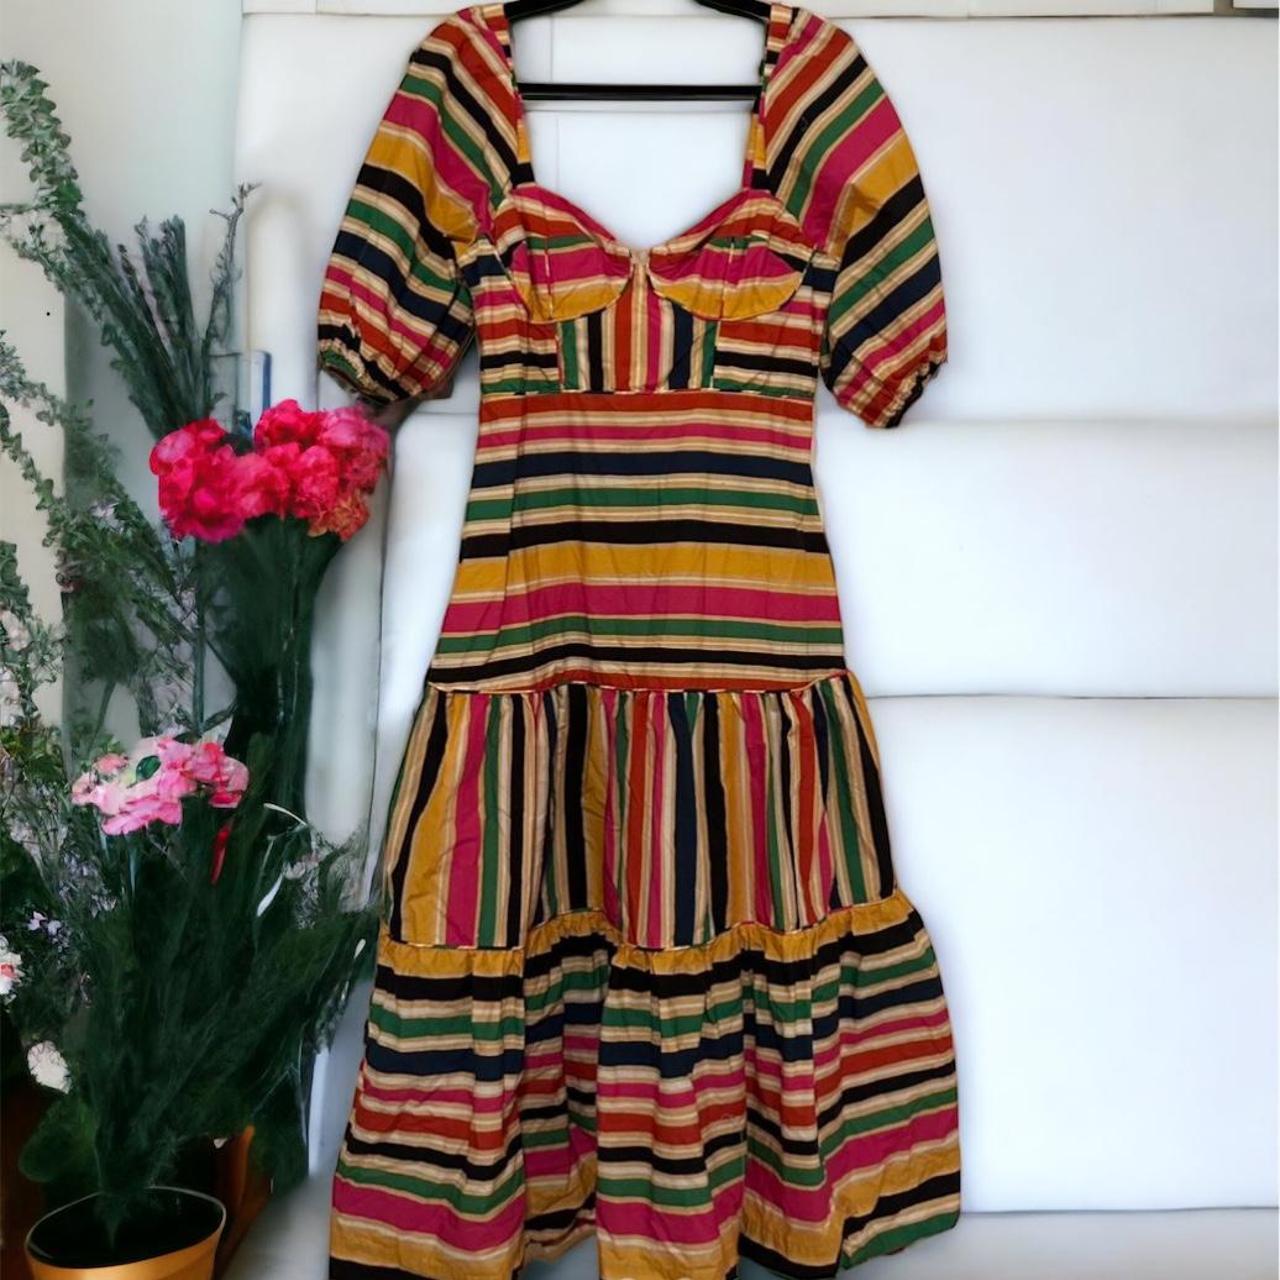 Farm Rio Women's Red and Yellow Dress